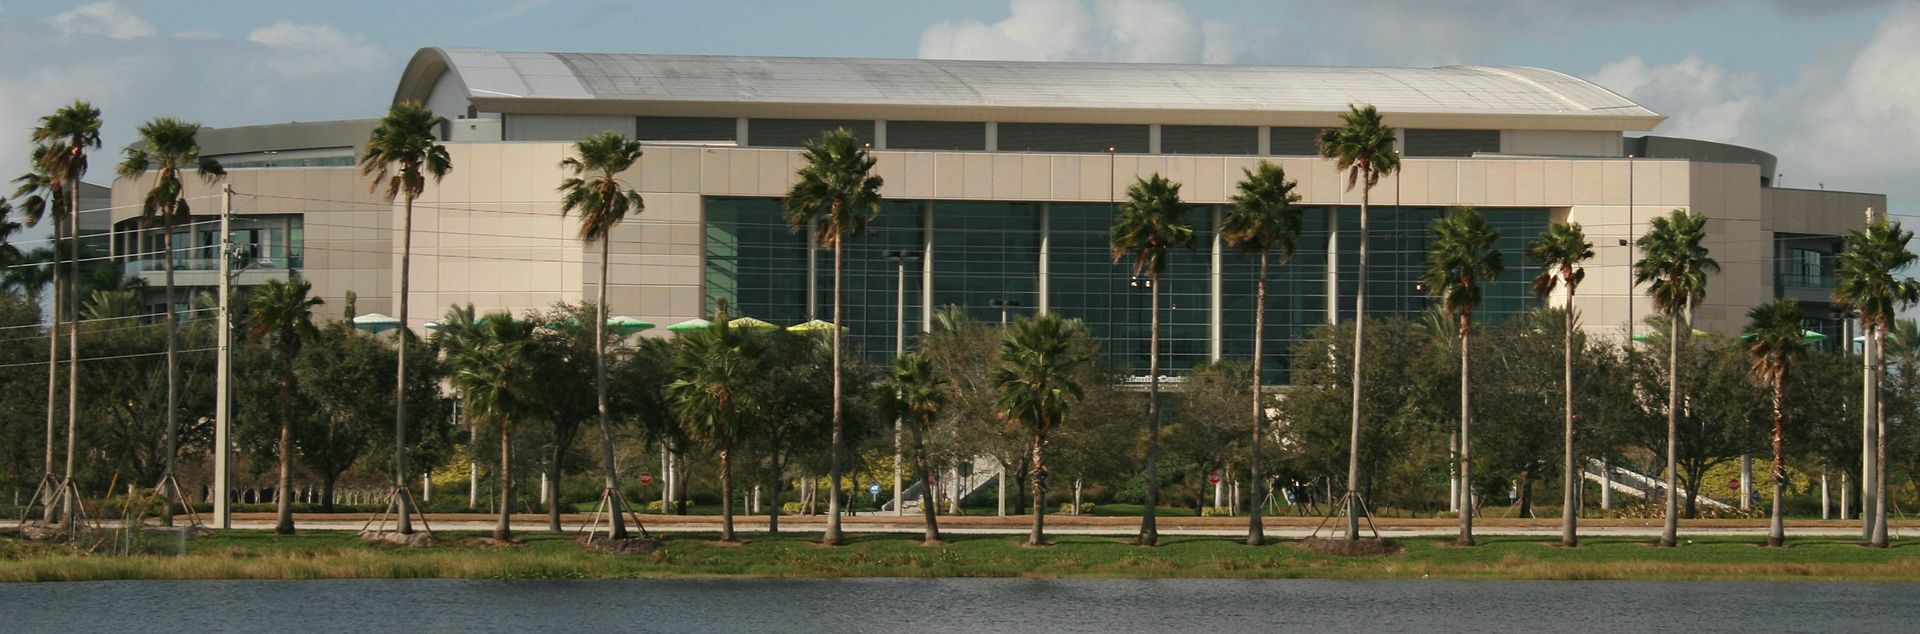 Amerant Bank Arena Set To Donate 250 Tickets To Local Veterans And First Responders In Florida Panthers Partnership